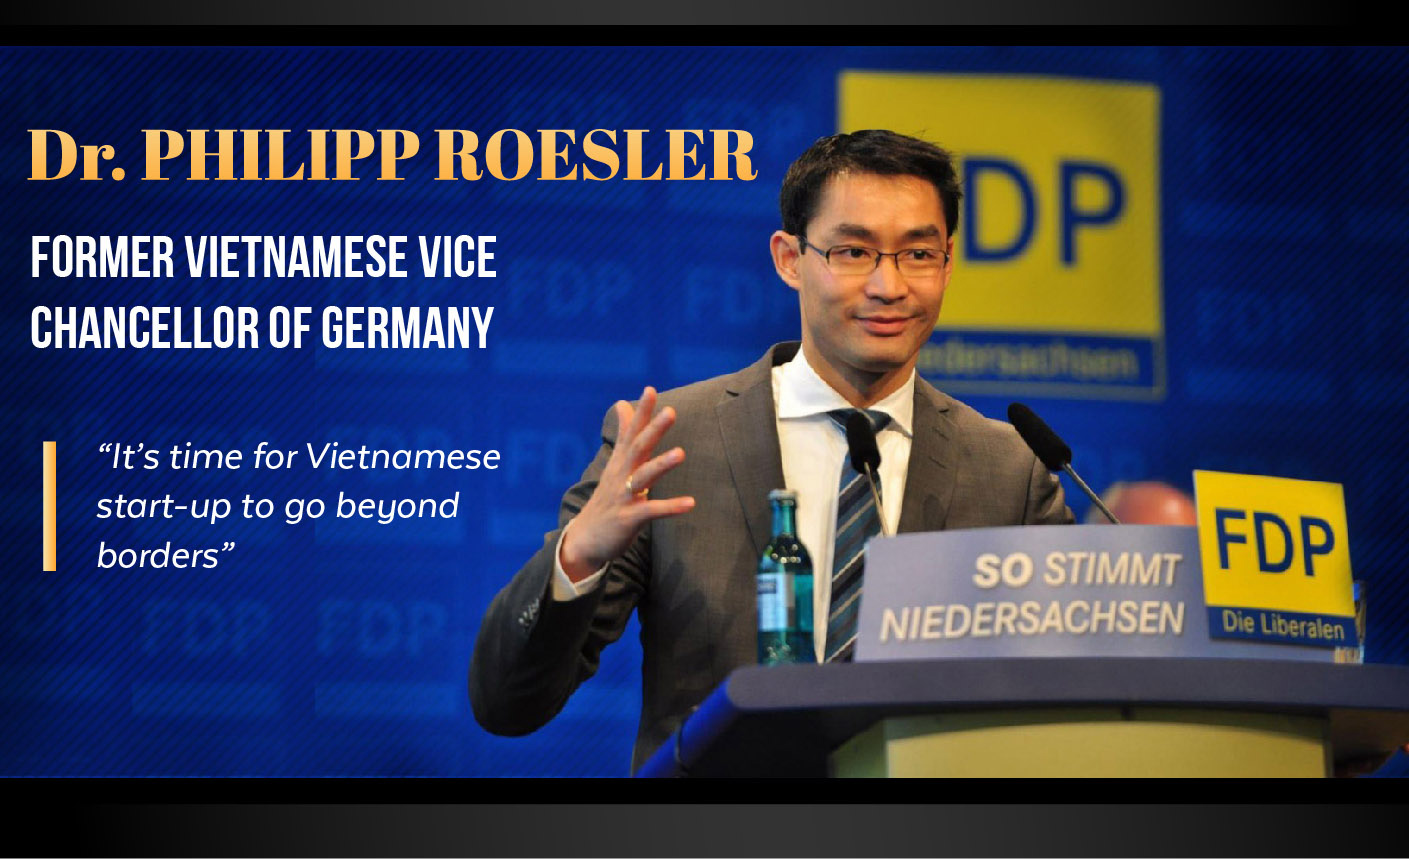 DR.PHILIPP ROESLER FORMER VIETNAMESE VICE CHANCELLOR OF GERMANY “IT’S TIME FOR VIETNAMESE START-UP TO GO BEYOUND BORDERS”